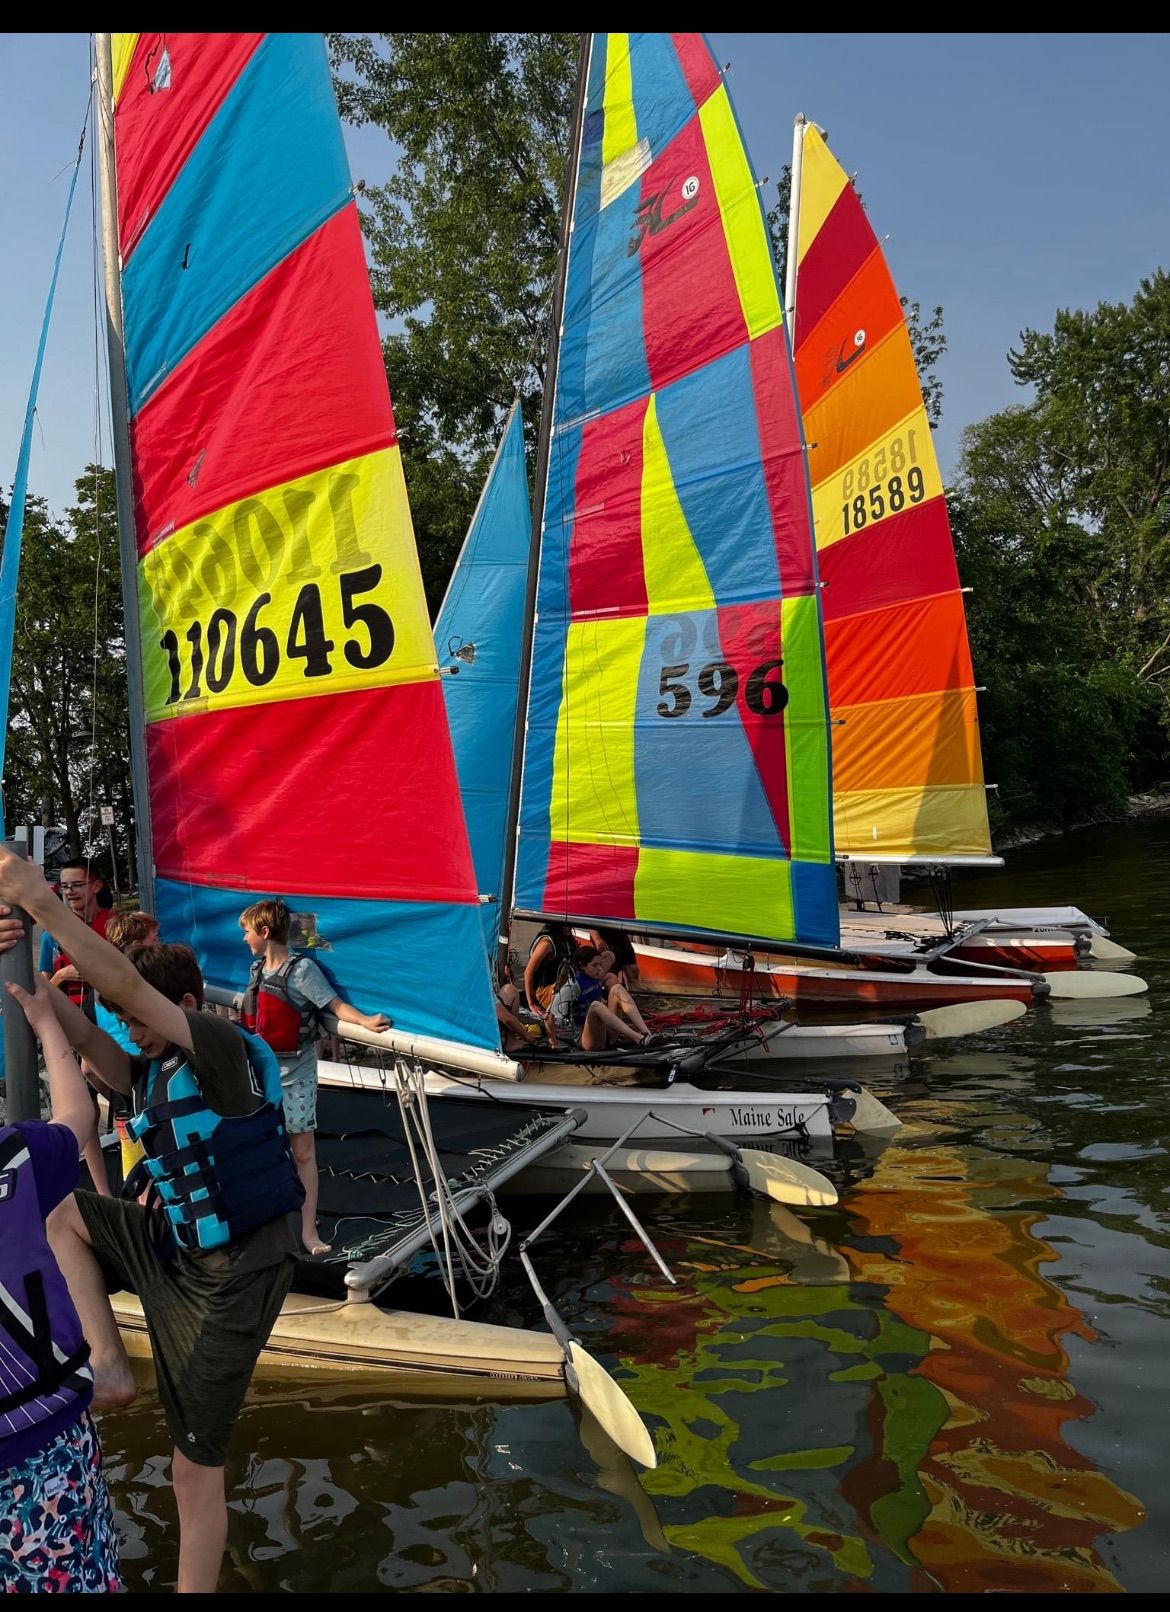 YOUTH SAILING RESOURCES Thursday evening, Sailing event